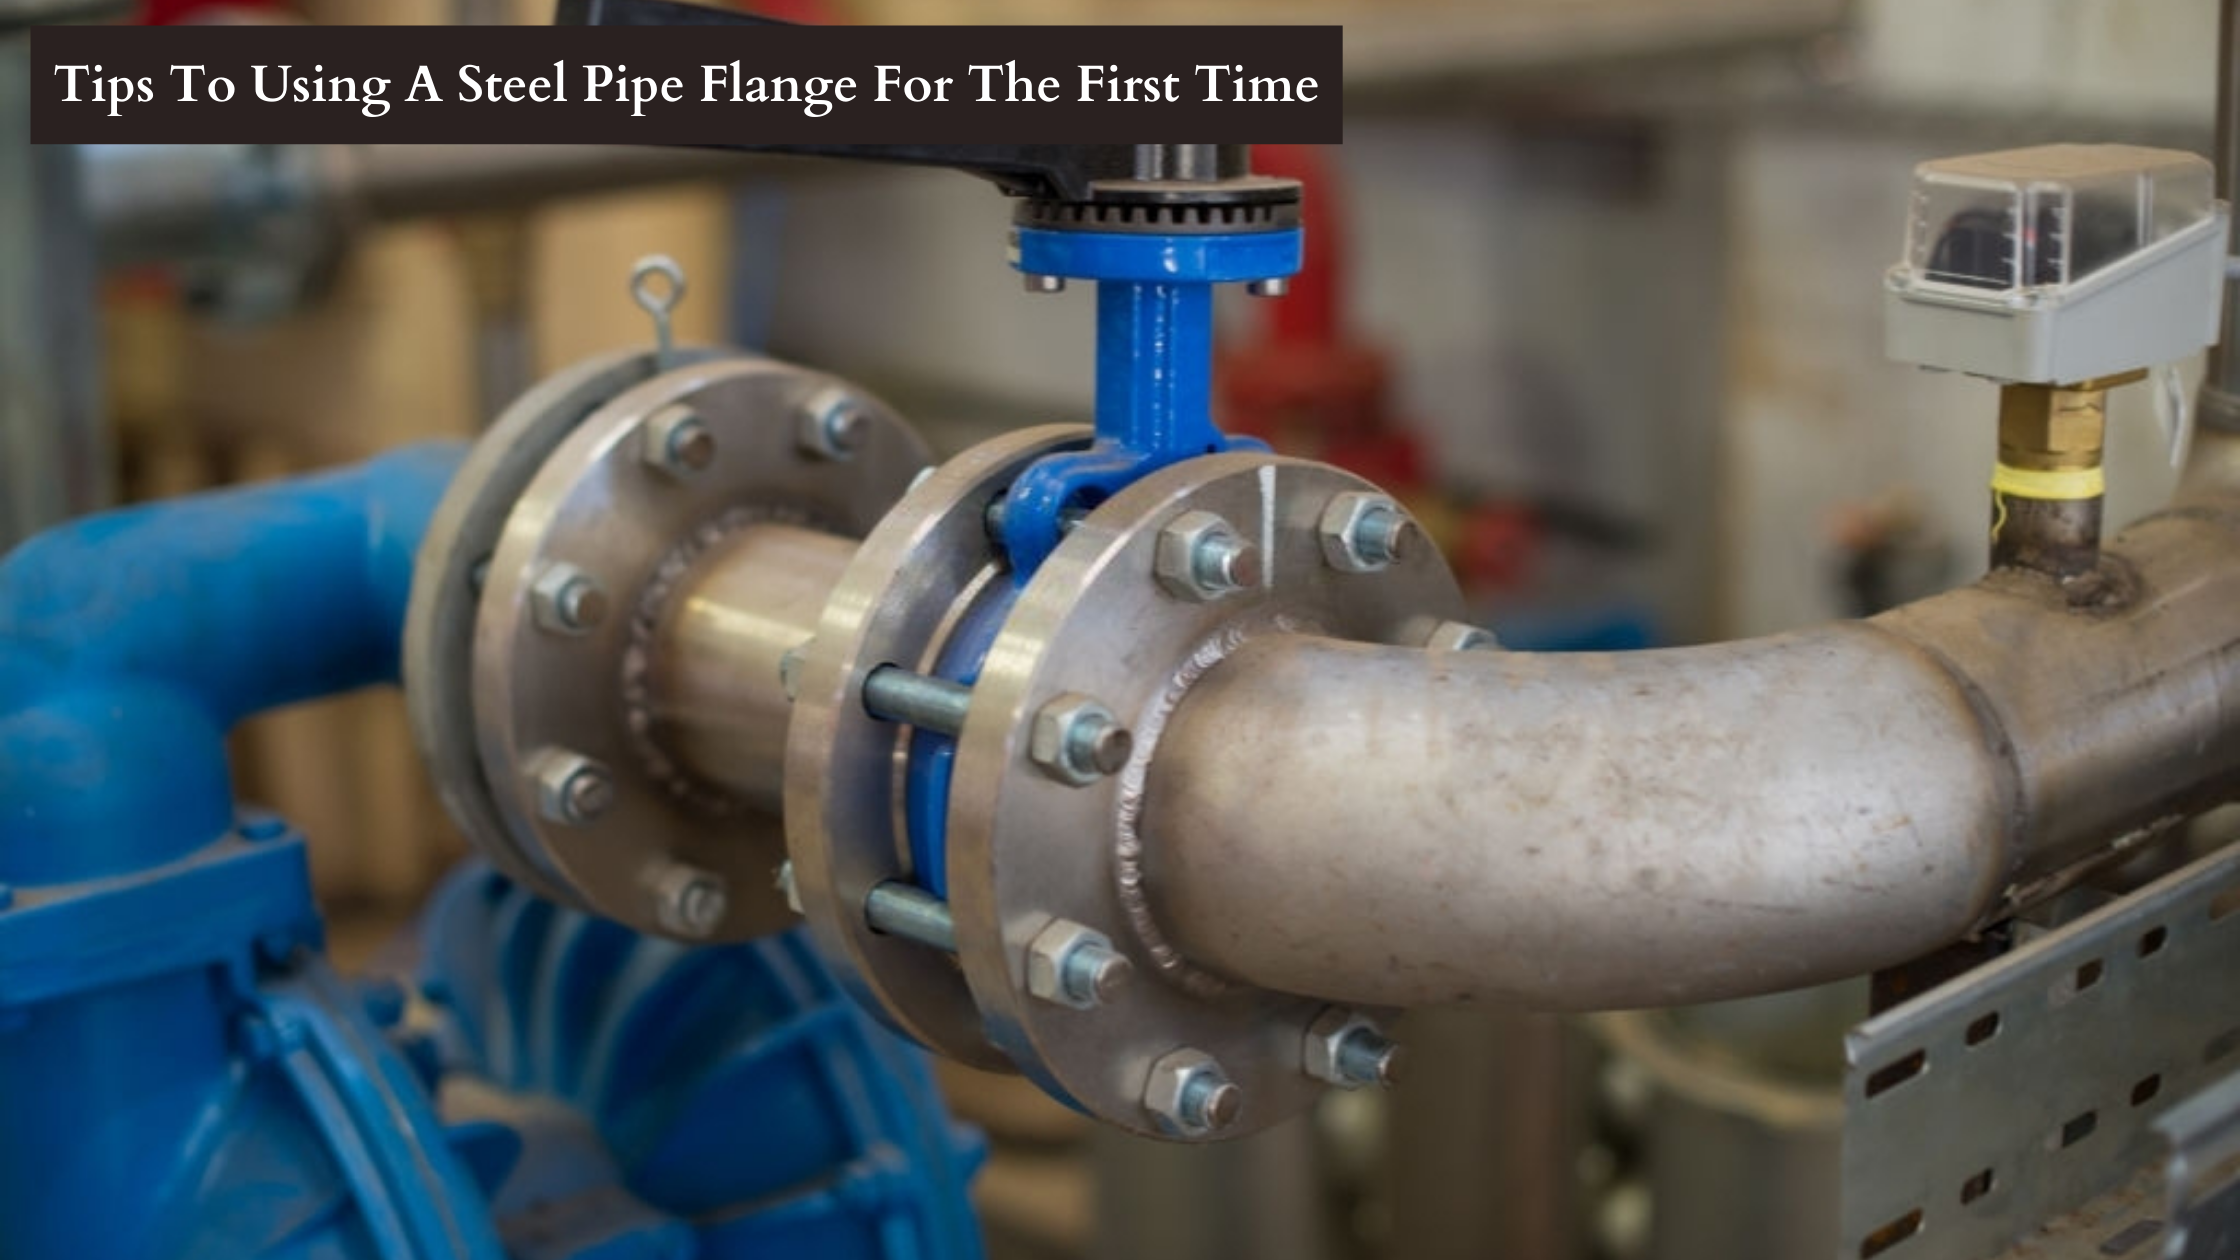 Tips To Using A Steel Pipe Flange For The First Time